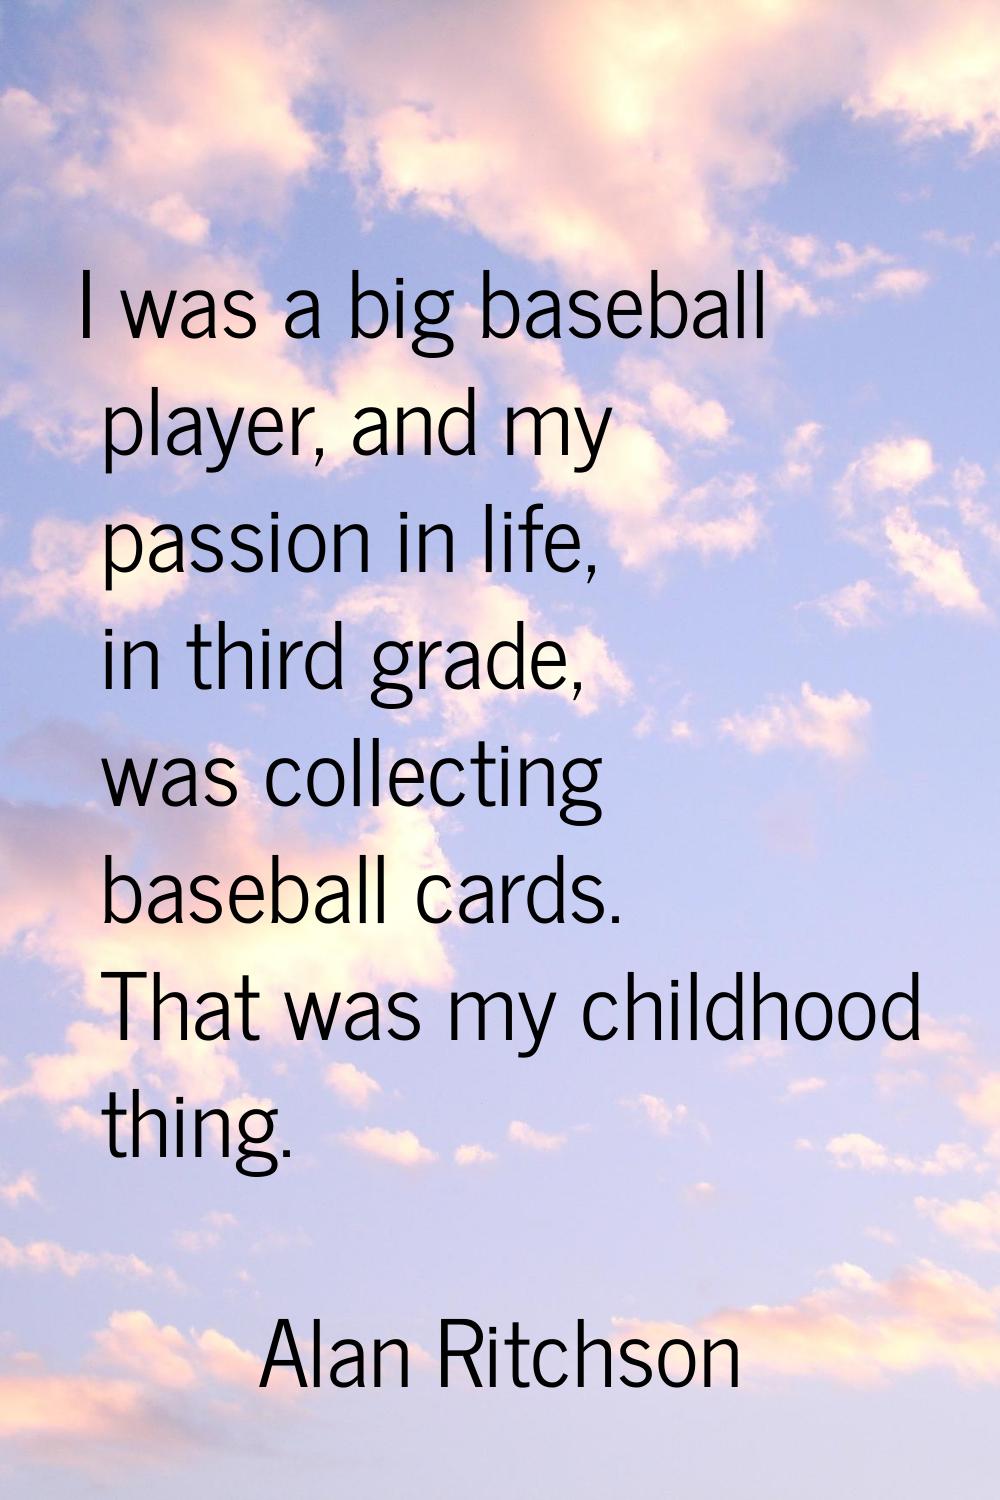 I was a big baseball player, and my passion in life, in third grade, was collecting baseball cards.